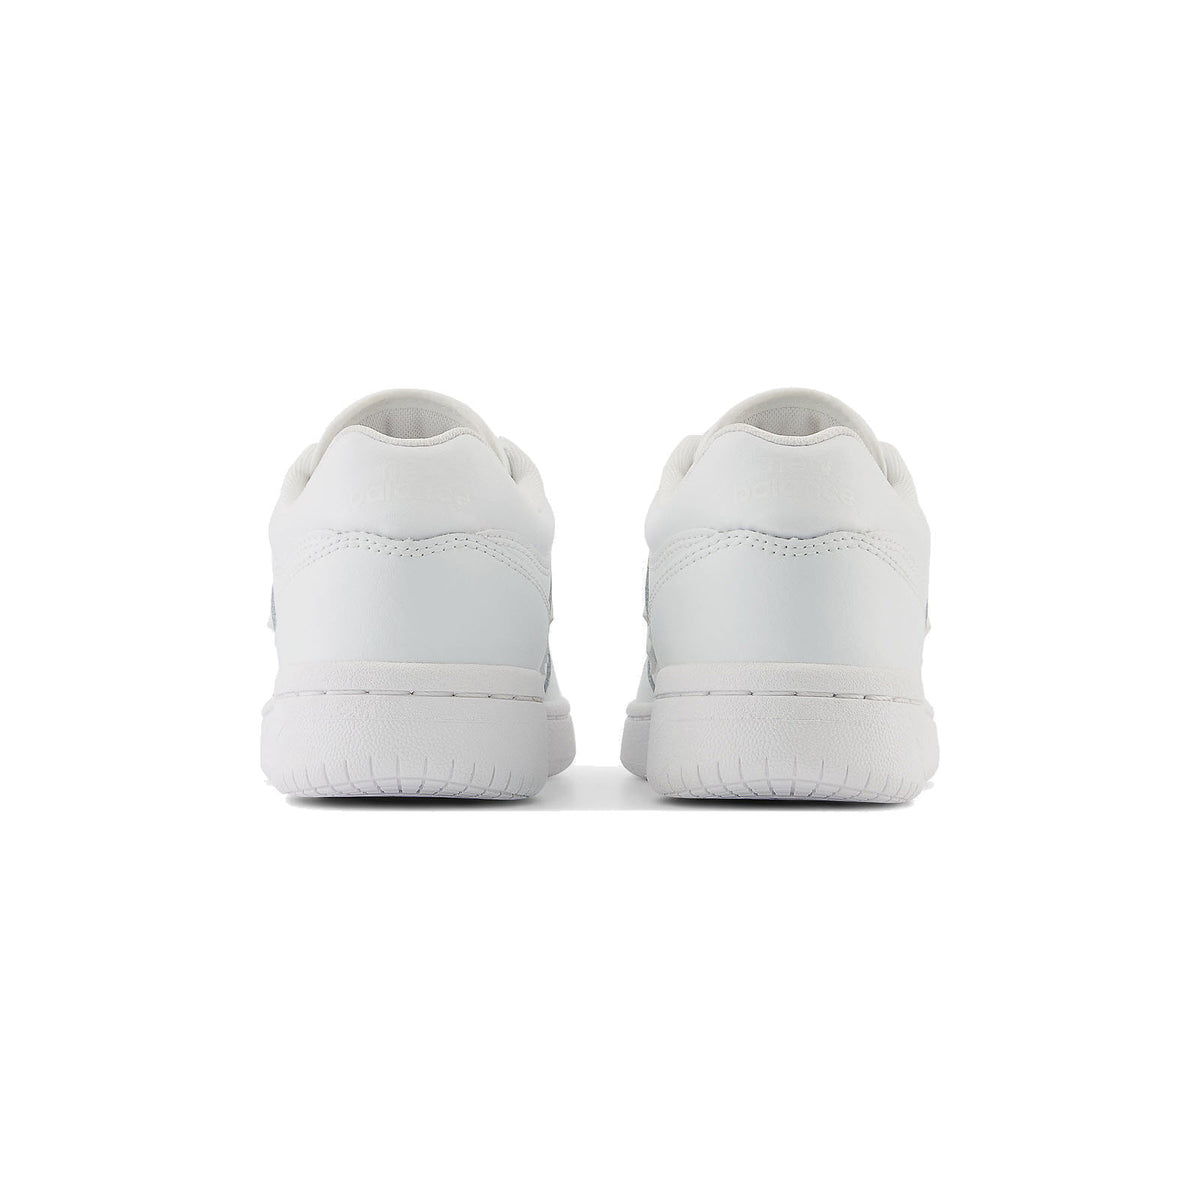 Rear view of a pair of white New Balance Kids 480 sneakers on a white background. 
Product Name: New Balance 480 White - Kids
Brand Name: New Balance